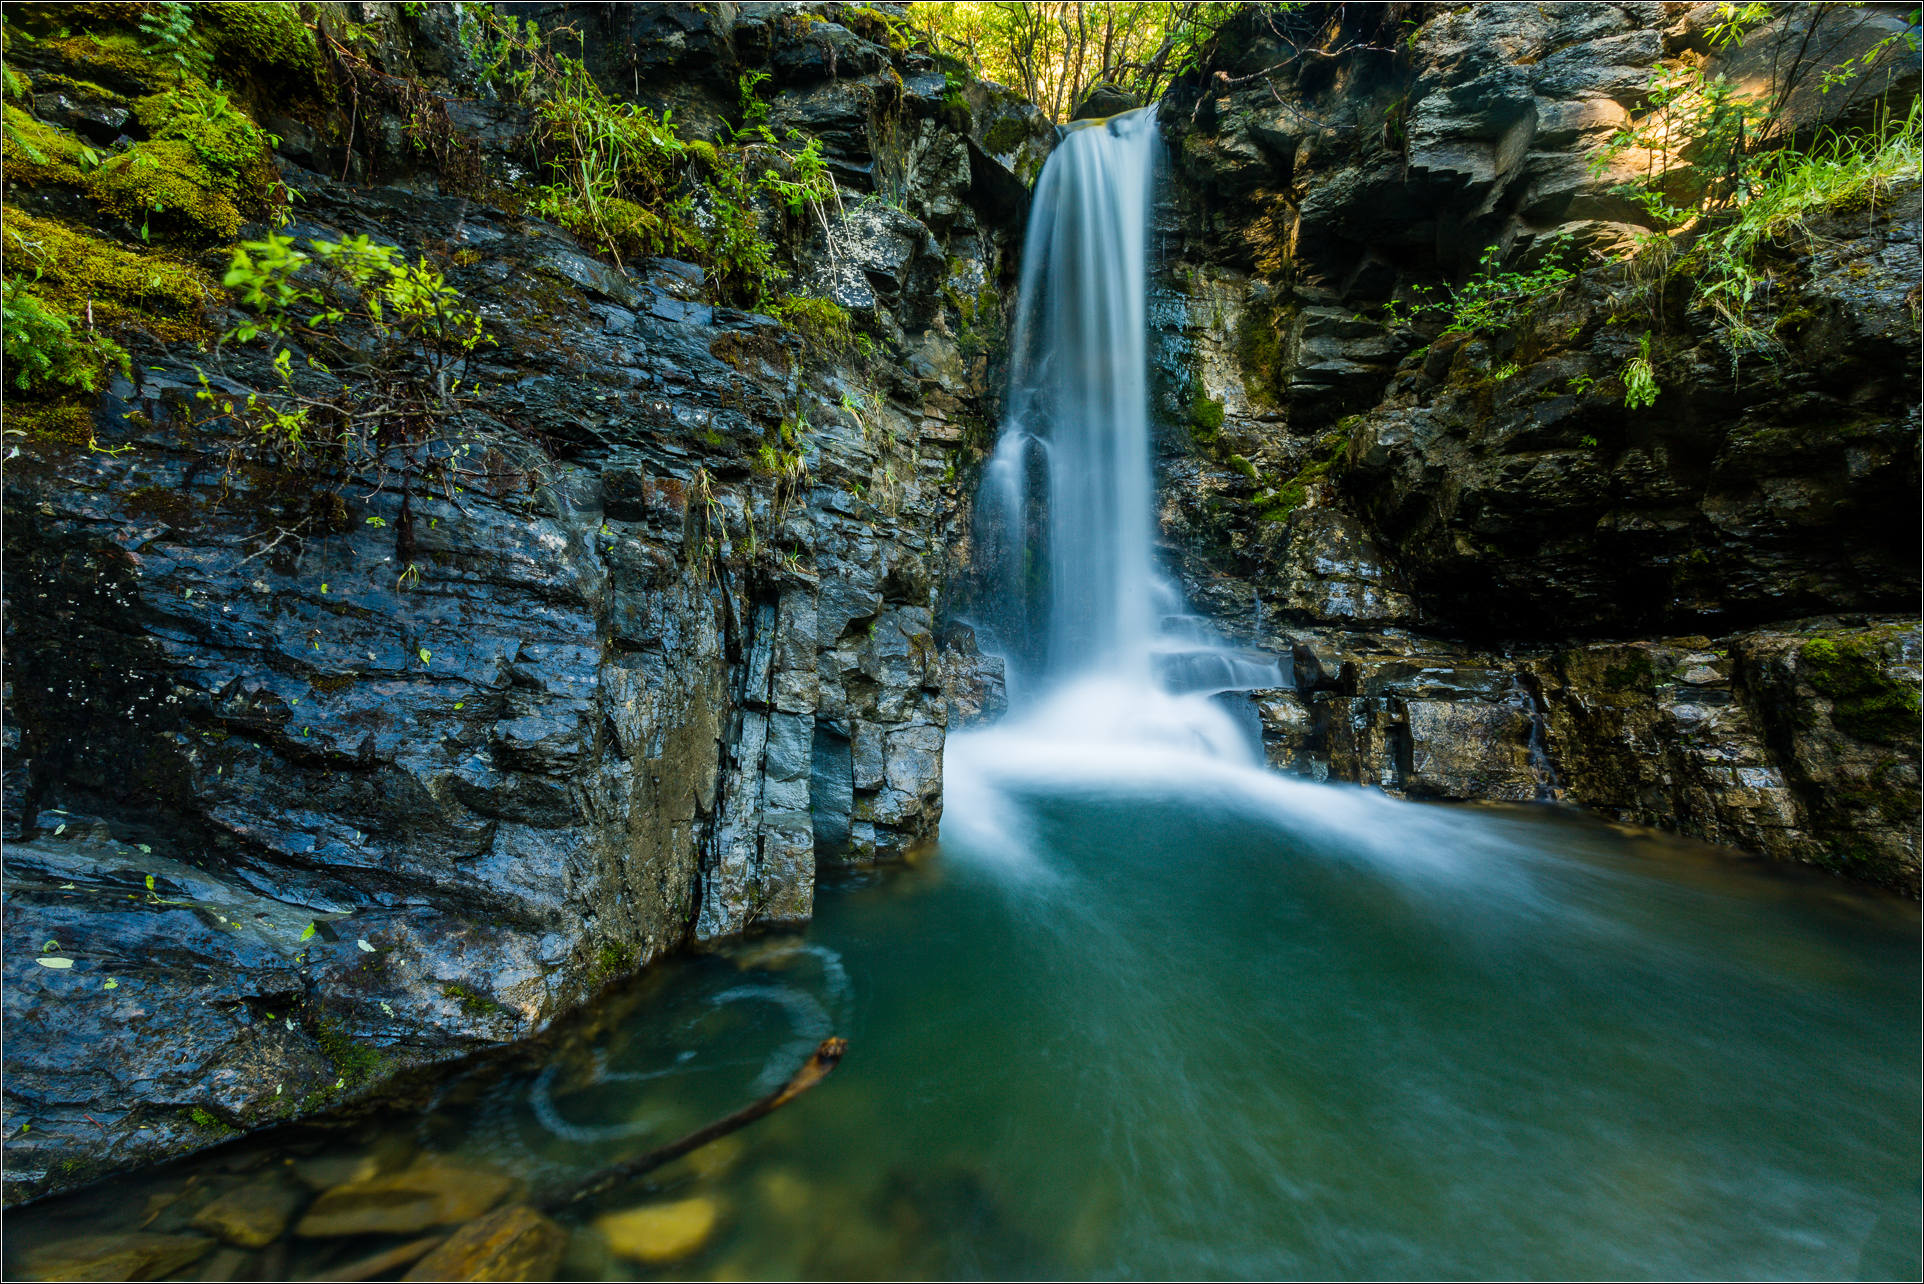 A secluded waterfall in Kananaskis | Christopher Martin Photography